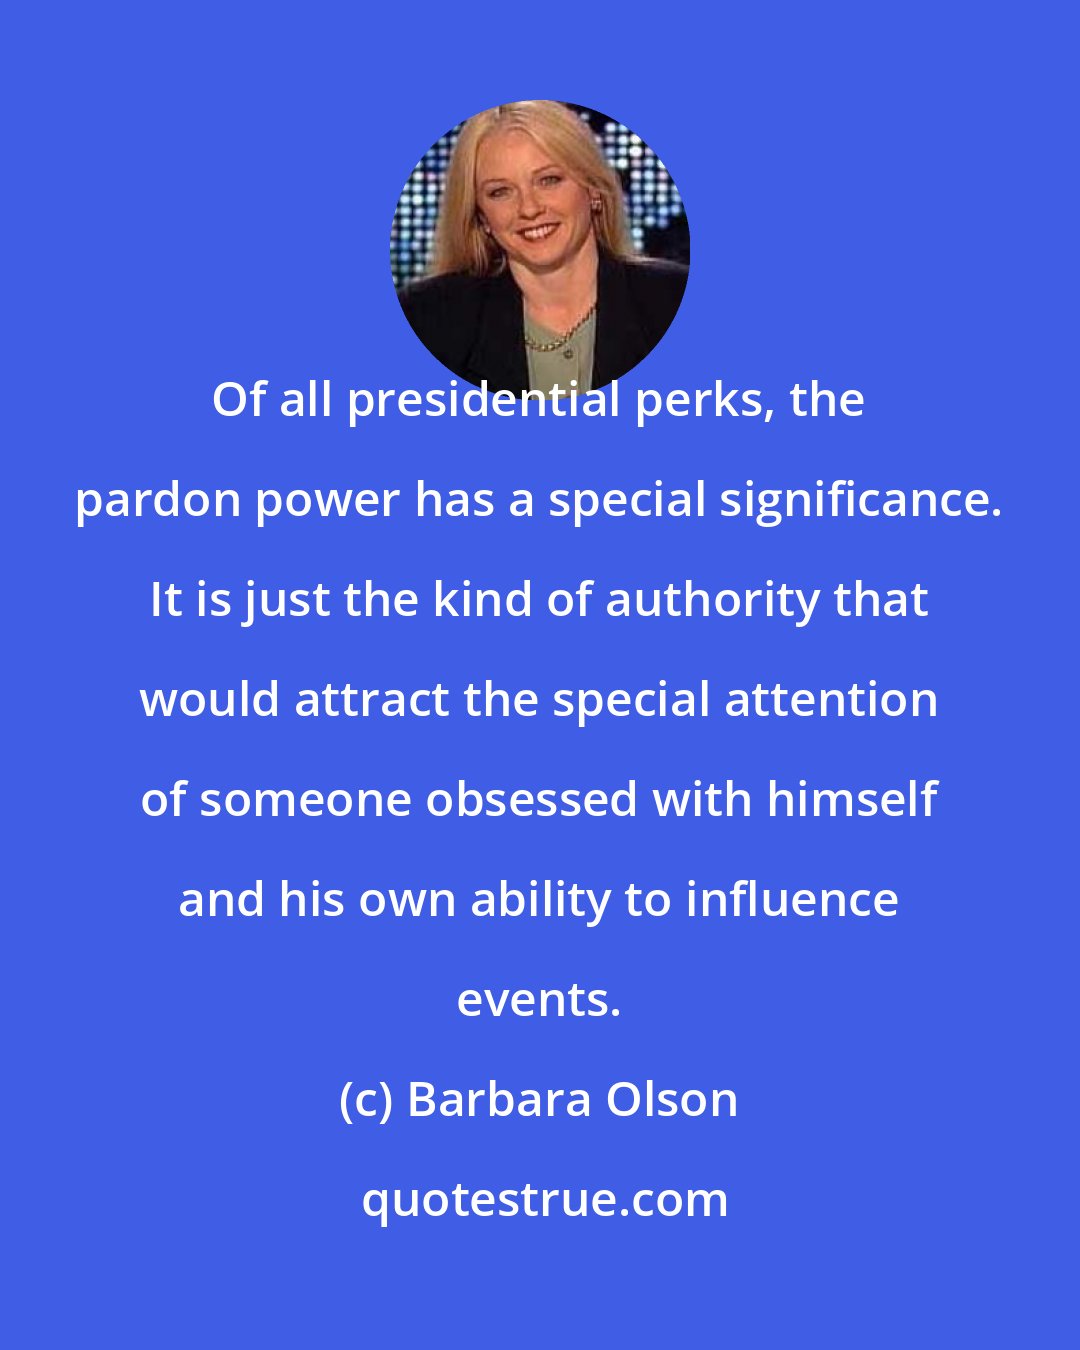 Barbara Olson: Of all presidential perks, the pardon power has a special significance. It is just the kind of authority that would attract the special attention of someone obsessed with himself and his own ability to influence events.